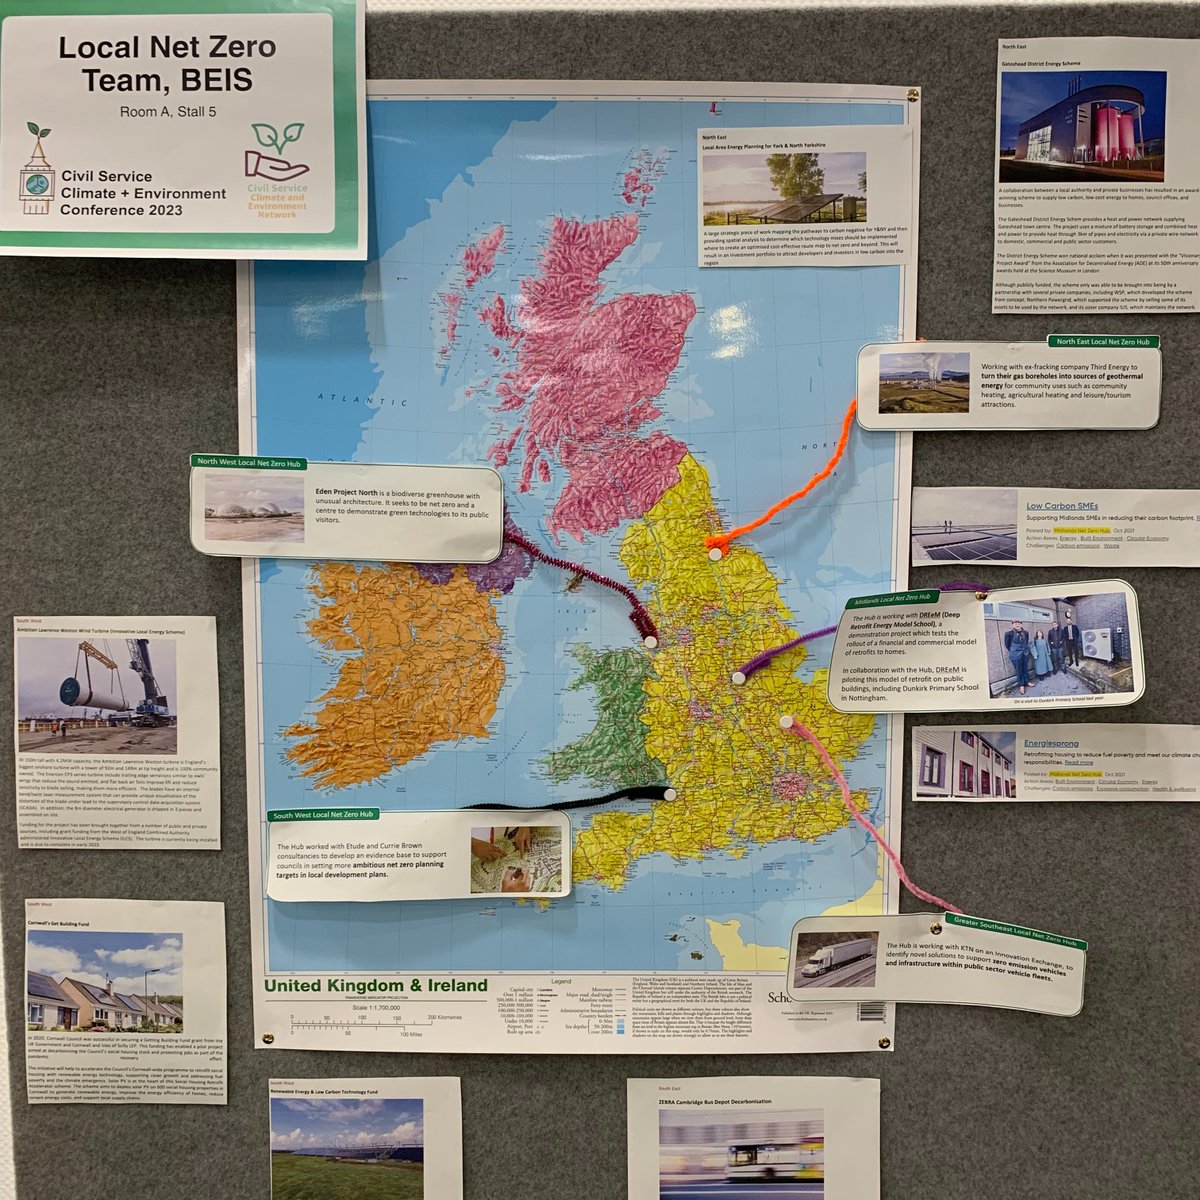 Great day at the @_CSEN conference speaking to civil servants across gov. Thanks to everyone who came by our stall to hear how we are supporting a local place-based approach to net zero! #CSCENConference2023 @energygovuk #LocalNetZero